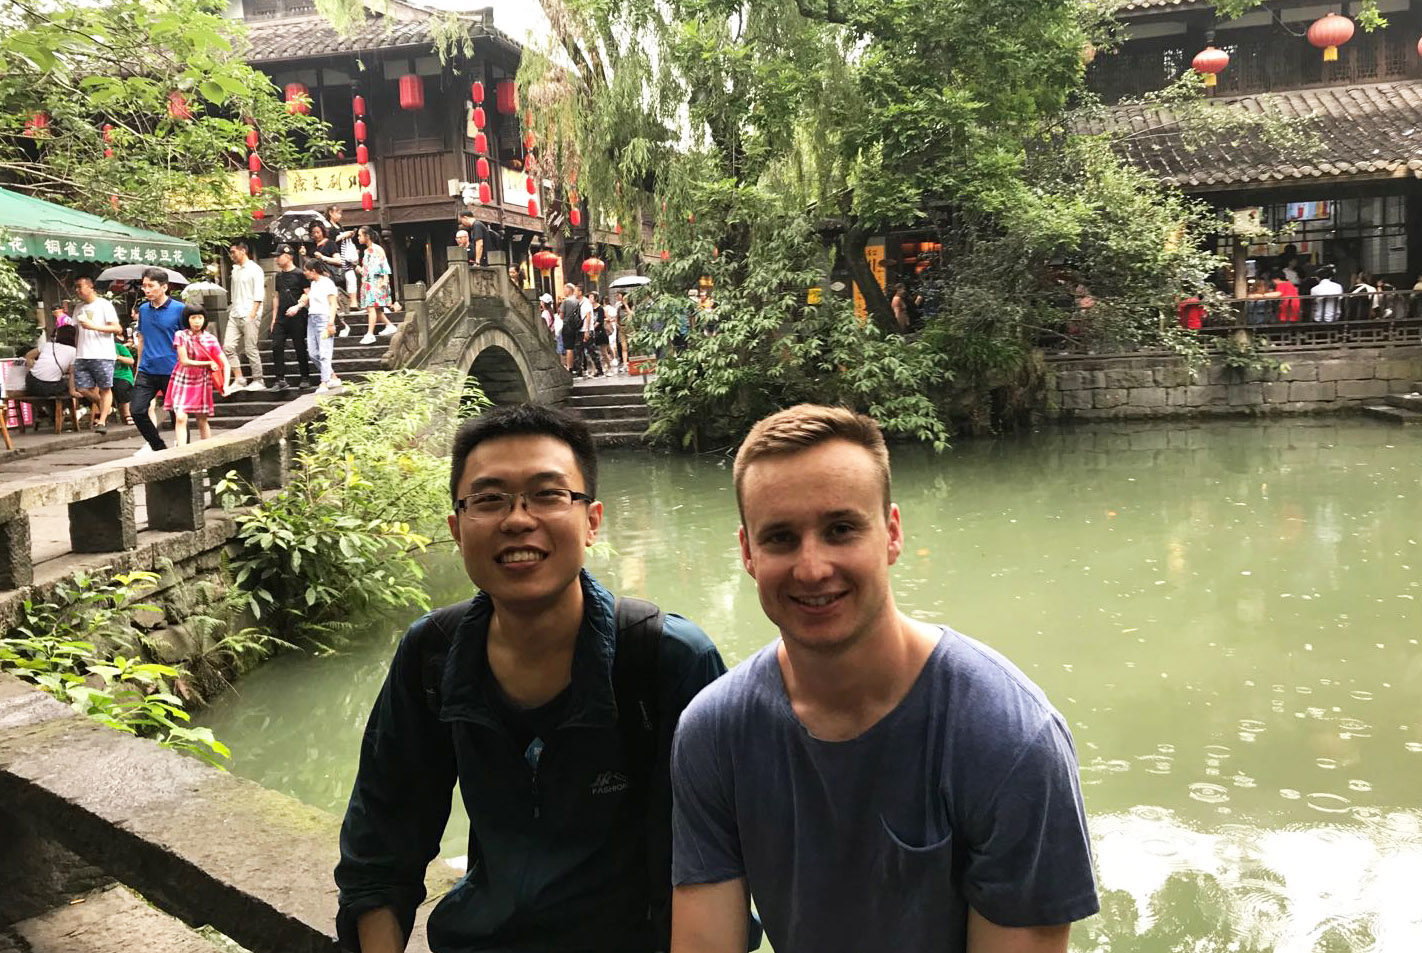 Jack and a colleague sitting in front of a pond in a traditional-style Chinese garden